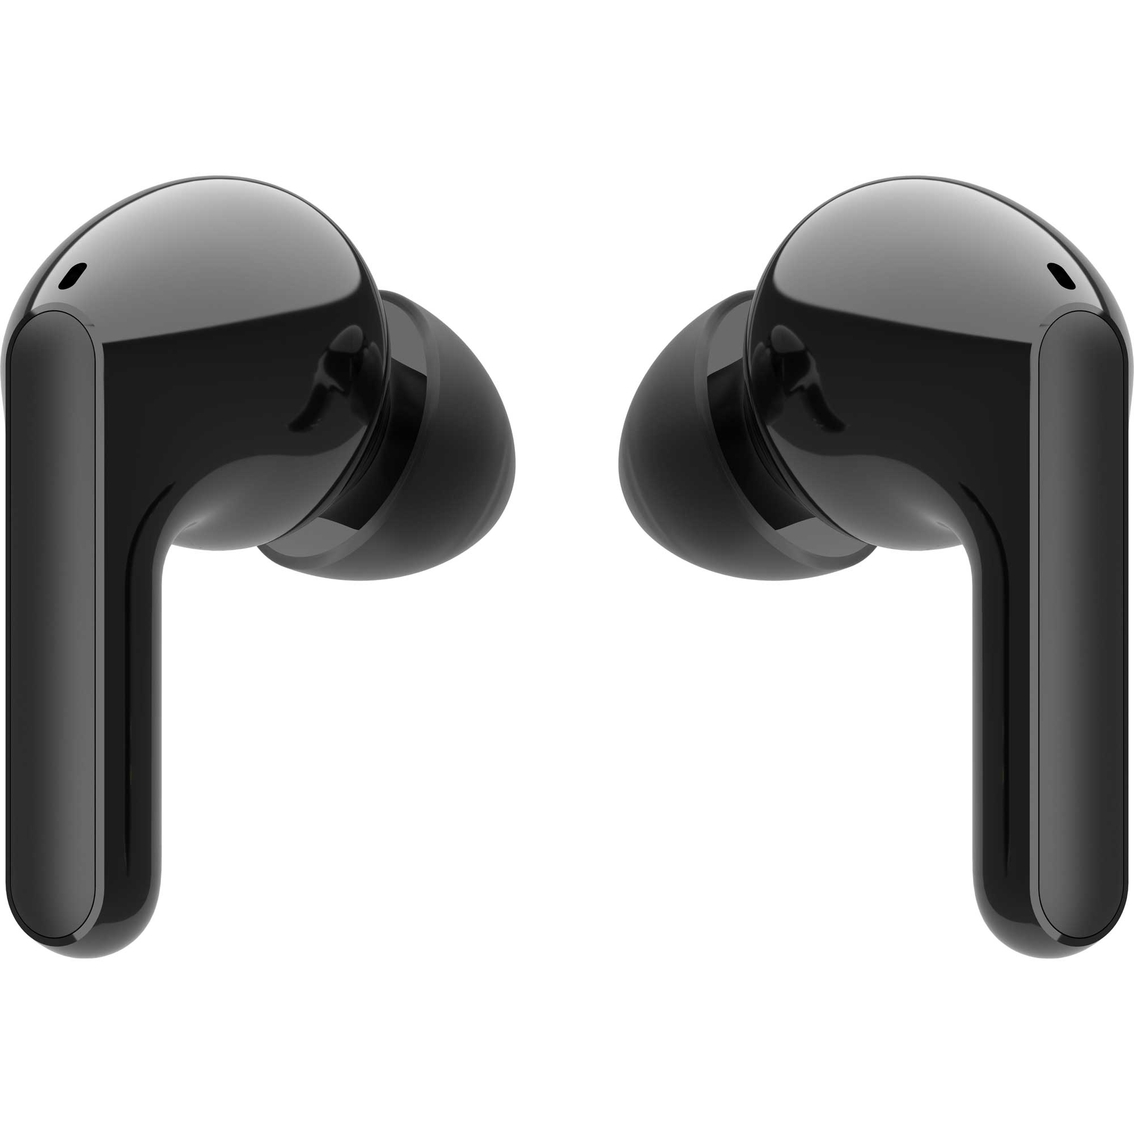 LG Tone Free Wireless Earbuds with Charging Case - Image 2 of 6